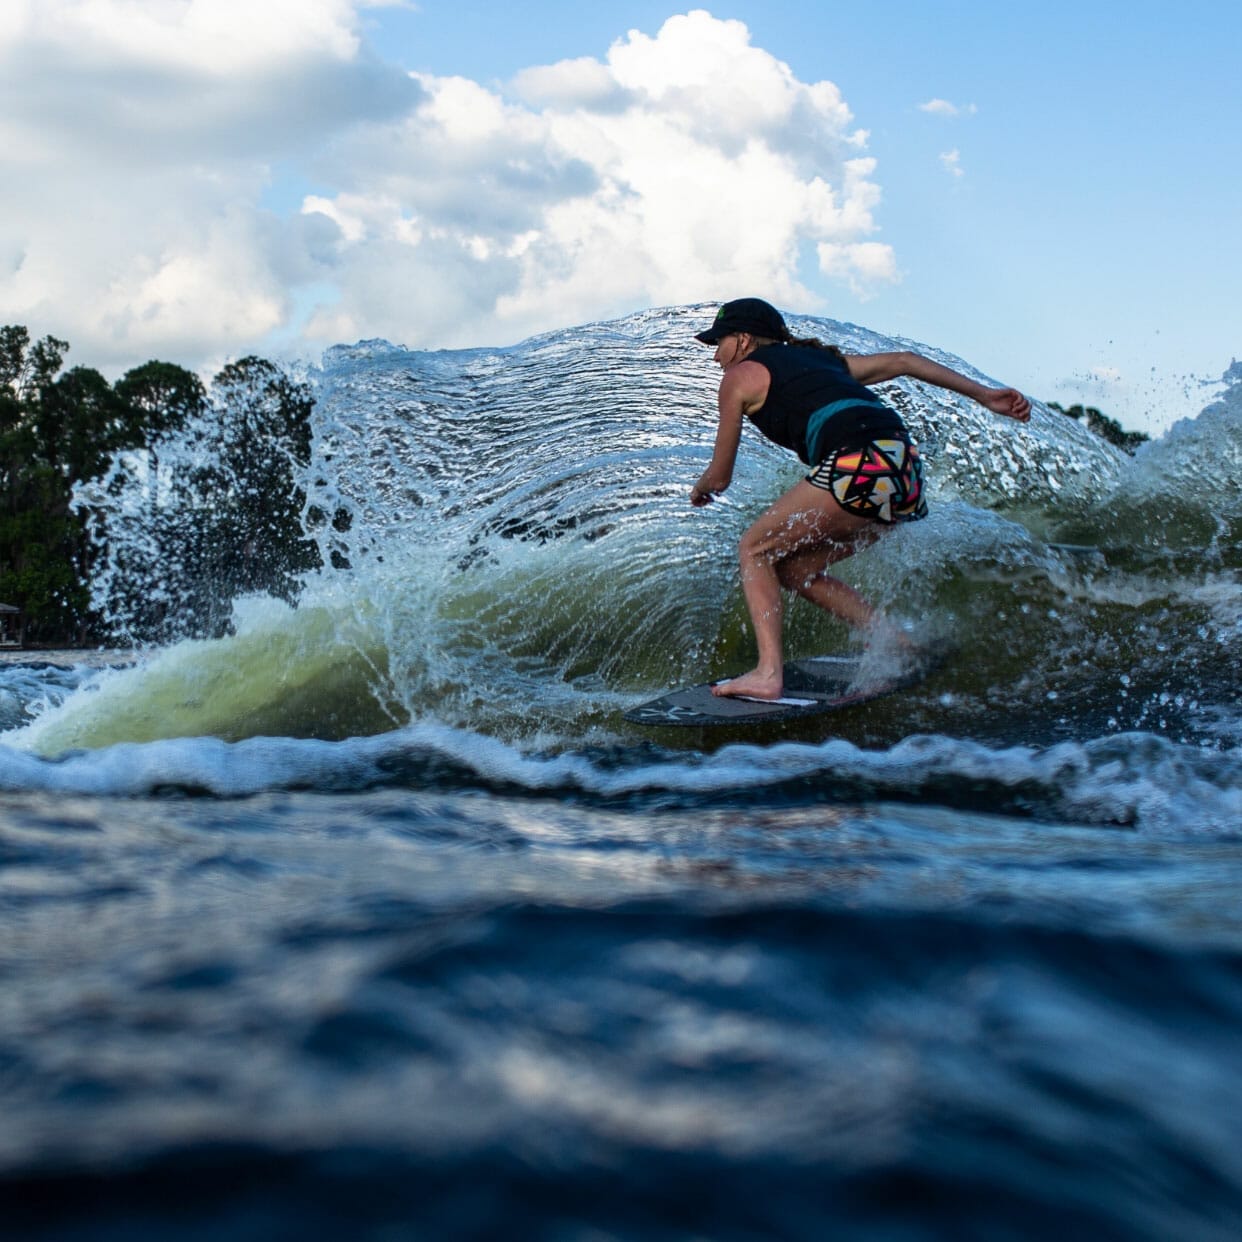 A person riding a wave on a wakesurf board.